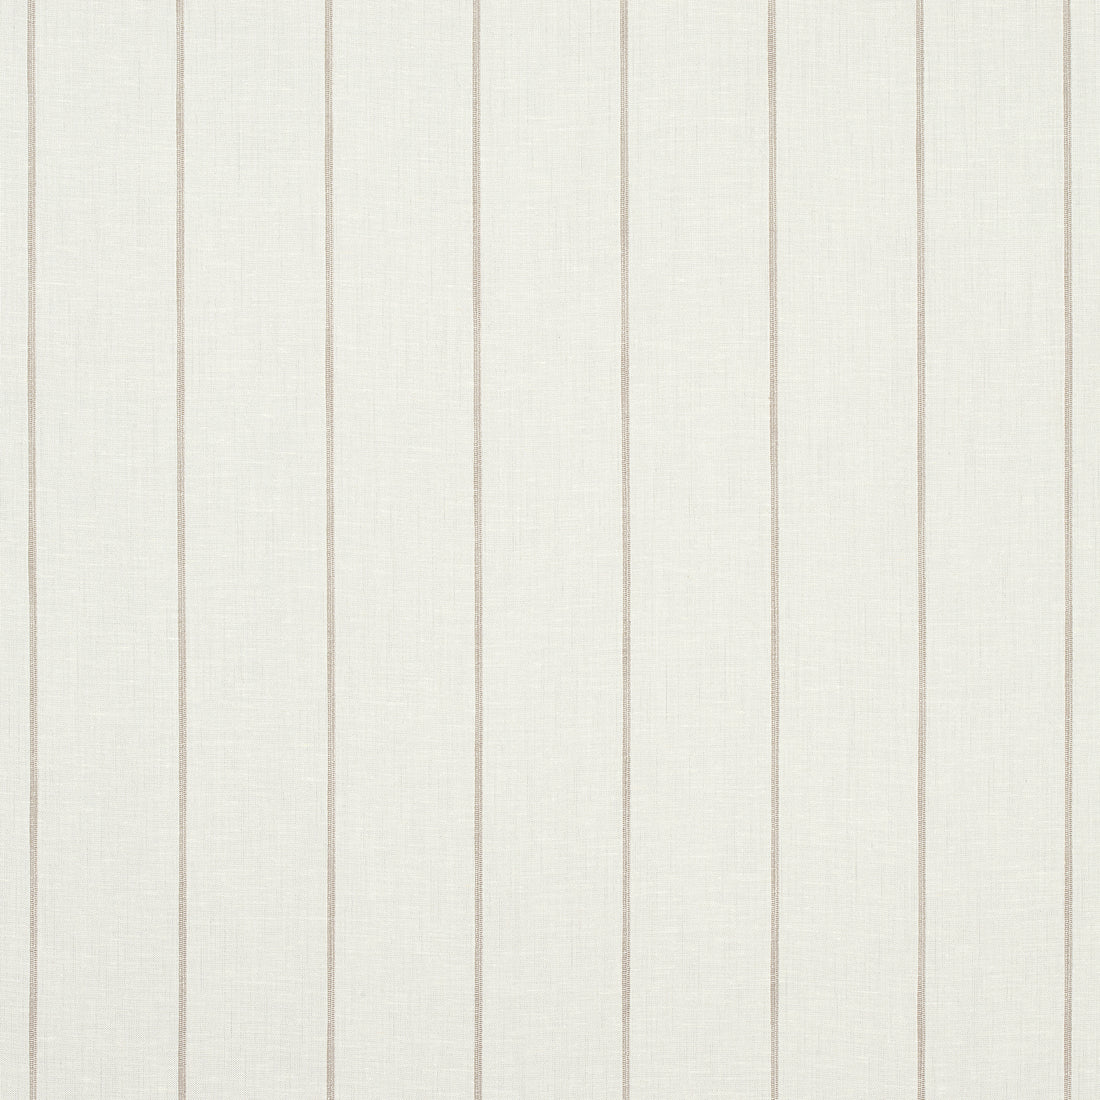 Berkshire Stripe fabric in smoke color - pattern number FWW7162 - by Thibaut in the Atmosphere collection